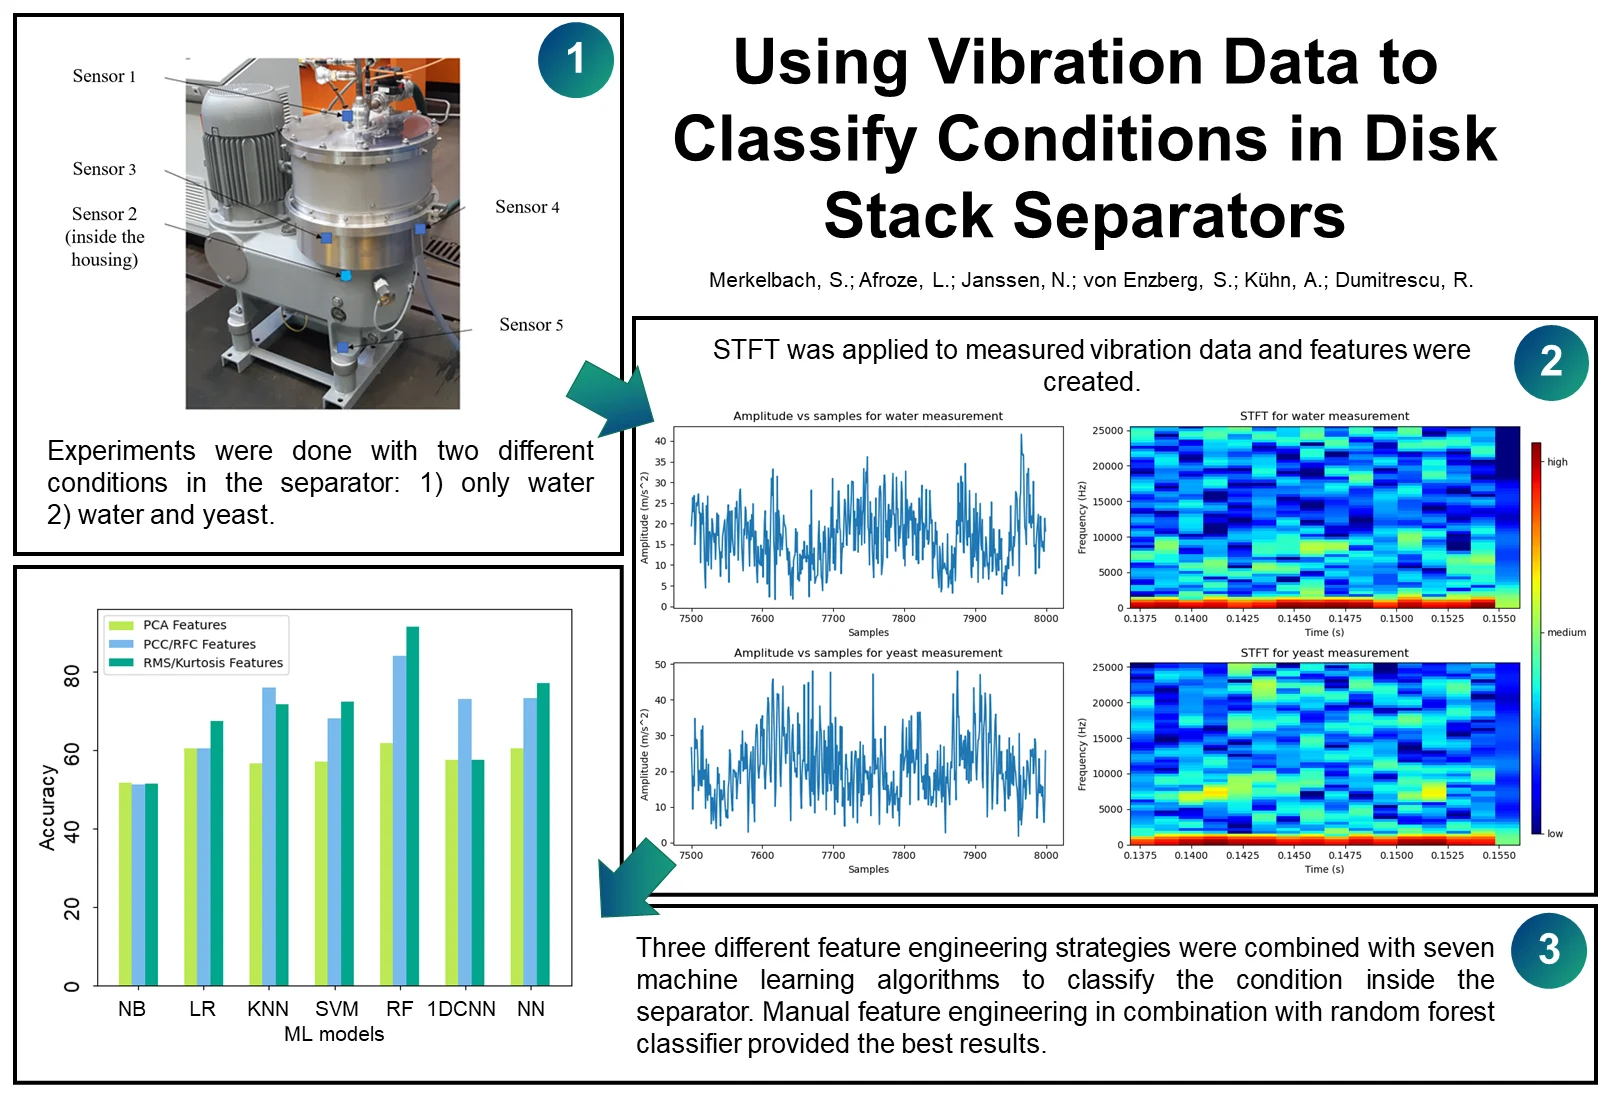 Using vibration data to classify conditions in disk stack separators